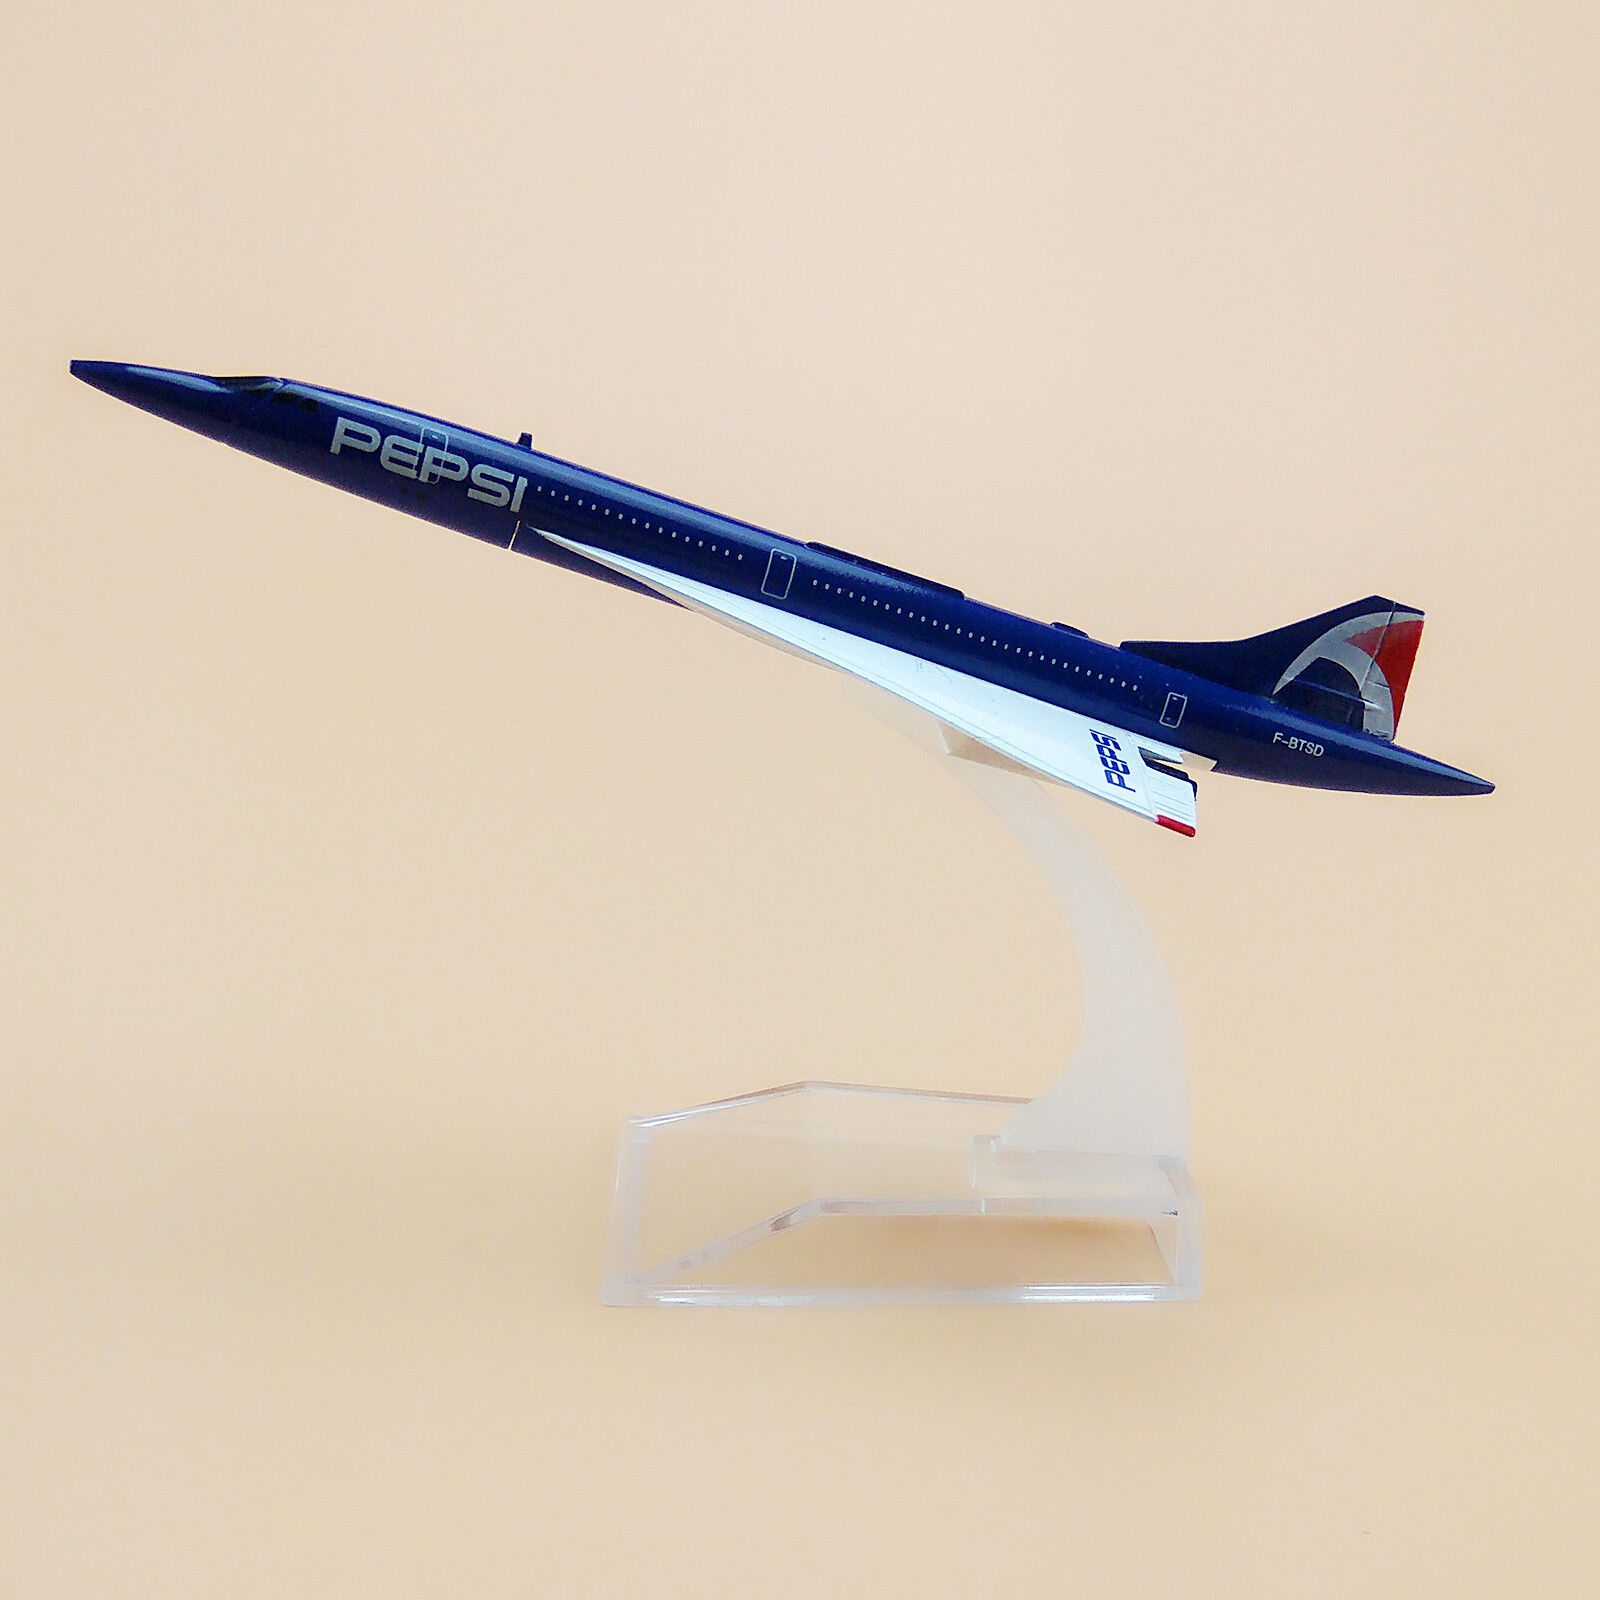 15.5cm Air France Costa Concord PEPSI F-BTSD Airlines Plane Model Airplane Alloy